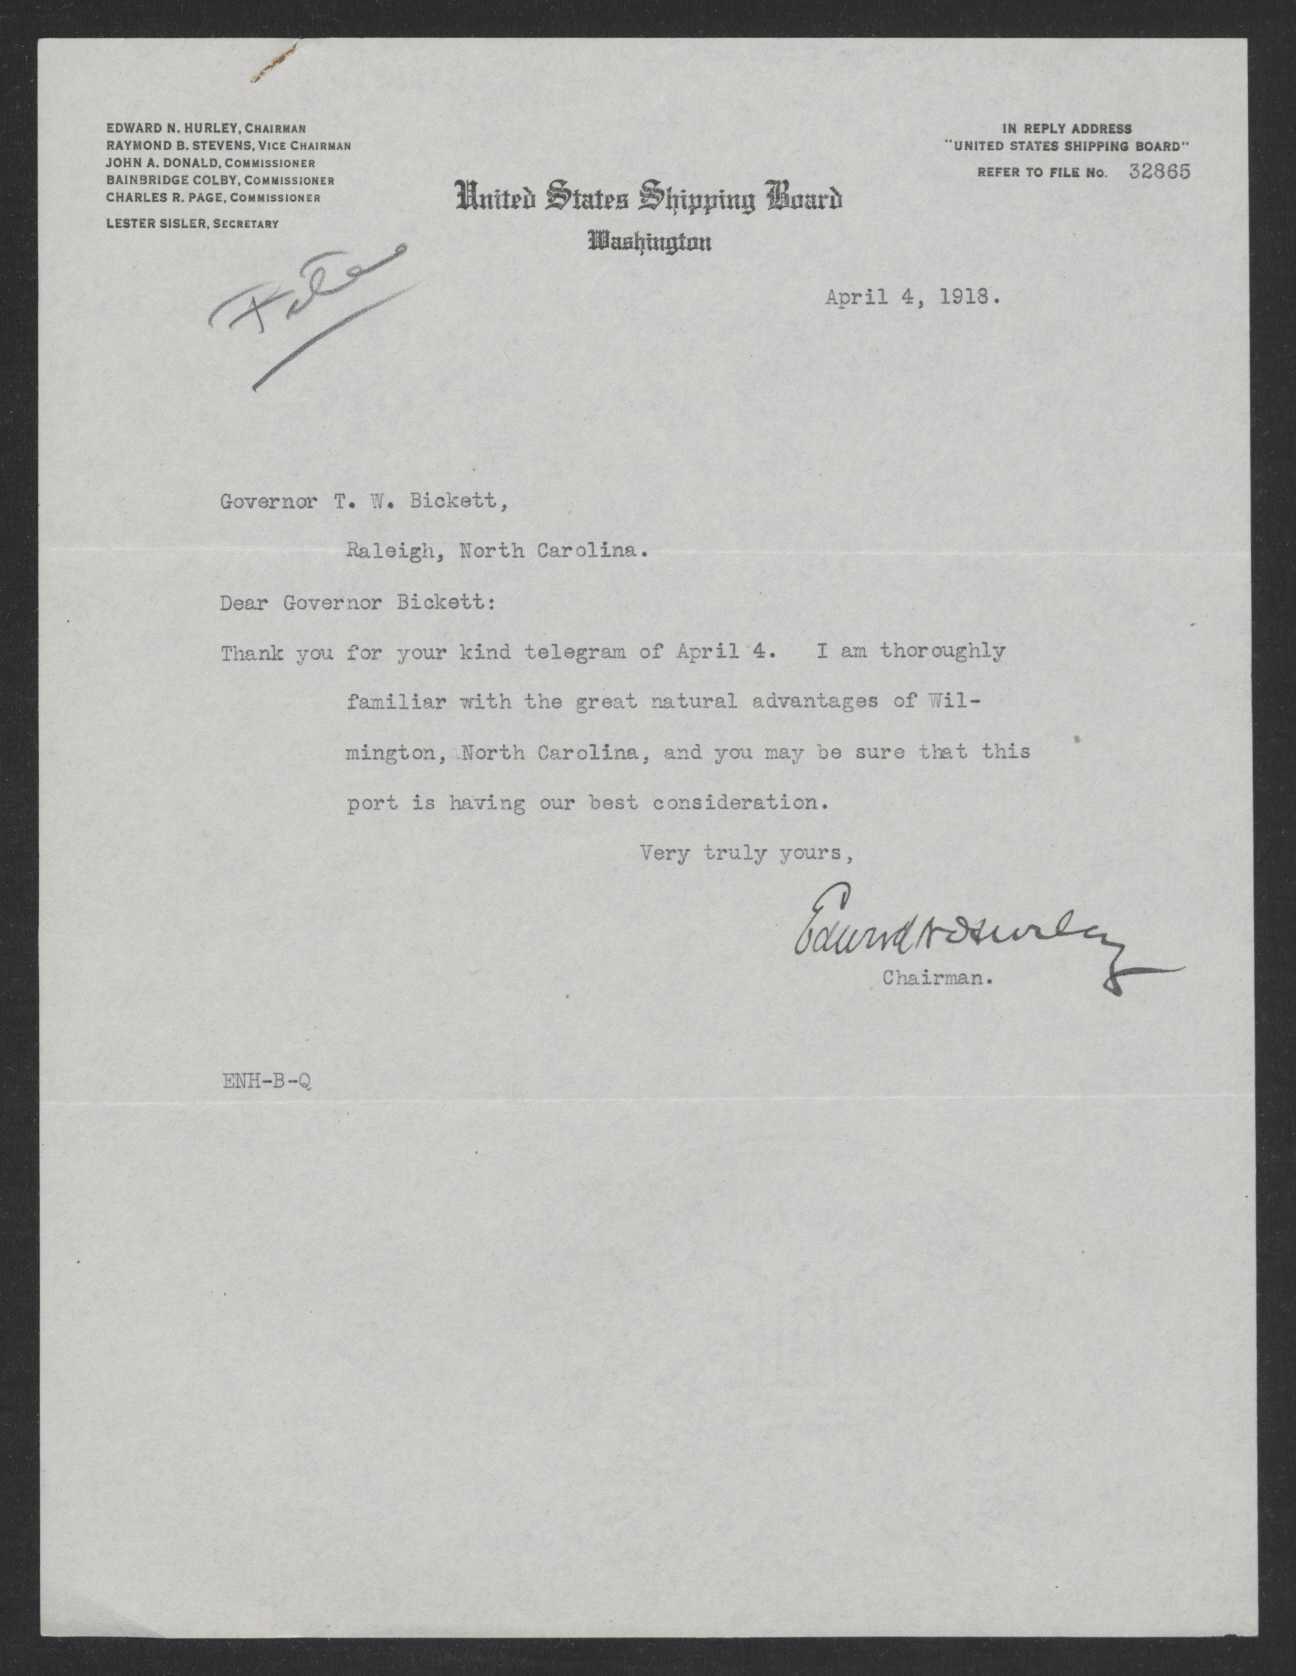 Letter from Edward N. Hurley to Thomas W. Bickett, April 4, 1918